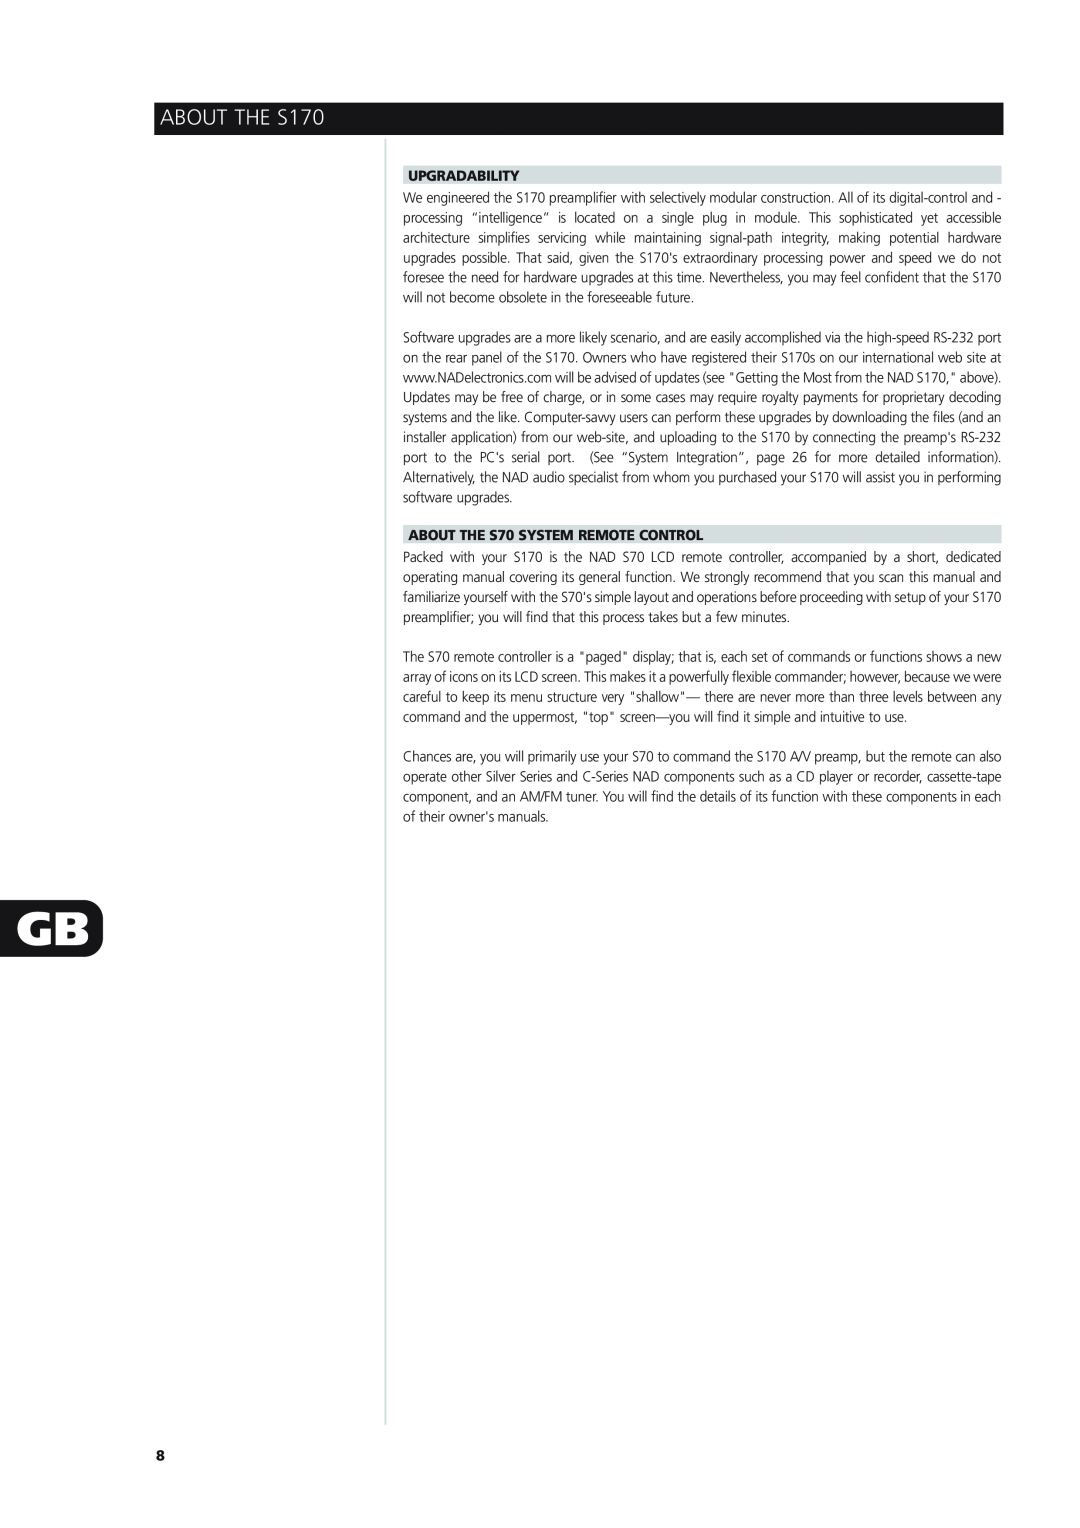 NAD owner manual ABOUT THE S170, Upgradability, ABOUT THE S70 SYSTEM REMOTE CONTROL 